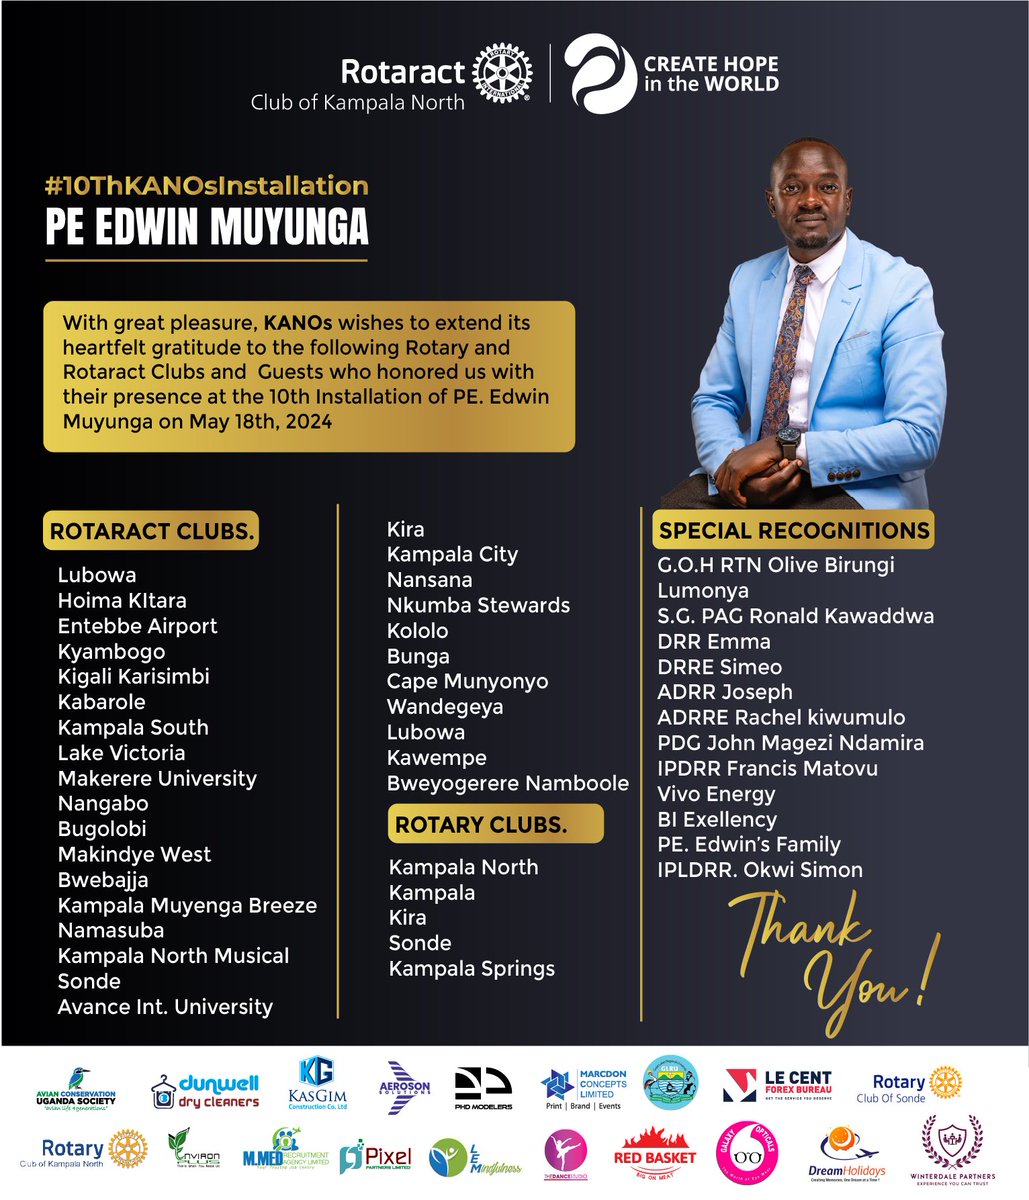 We extend our heartfelt gratitude to all Rotarians, Rotaractors, distinguished guests, dear family and friends who honored us by accepting our invitation to the momentous #10ThKANOsInstallation of our PE. @EdwinMuyunga
 Thank you for your love, and support.